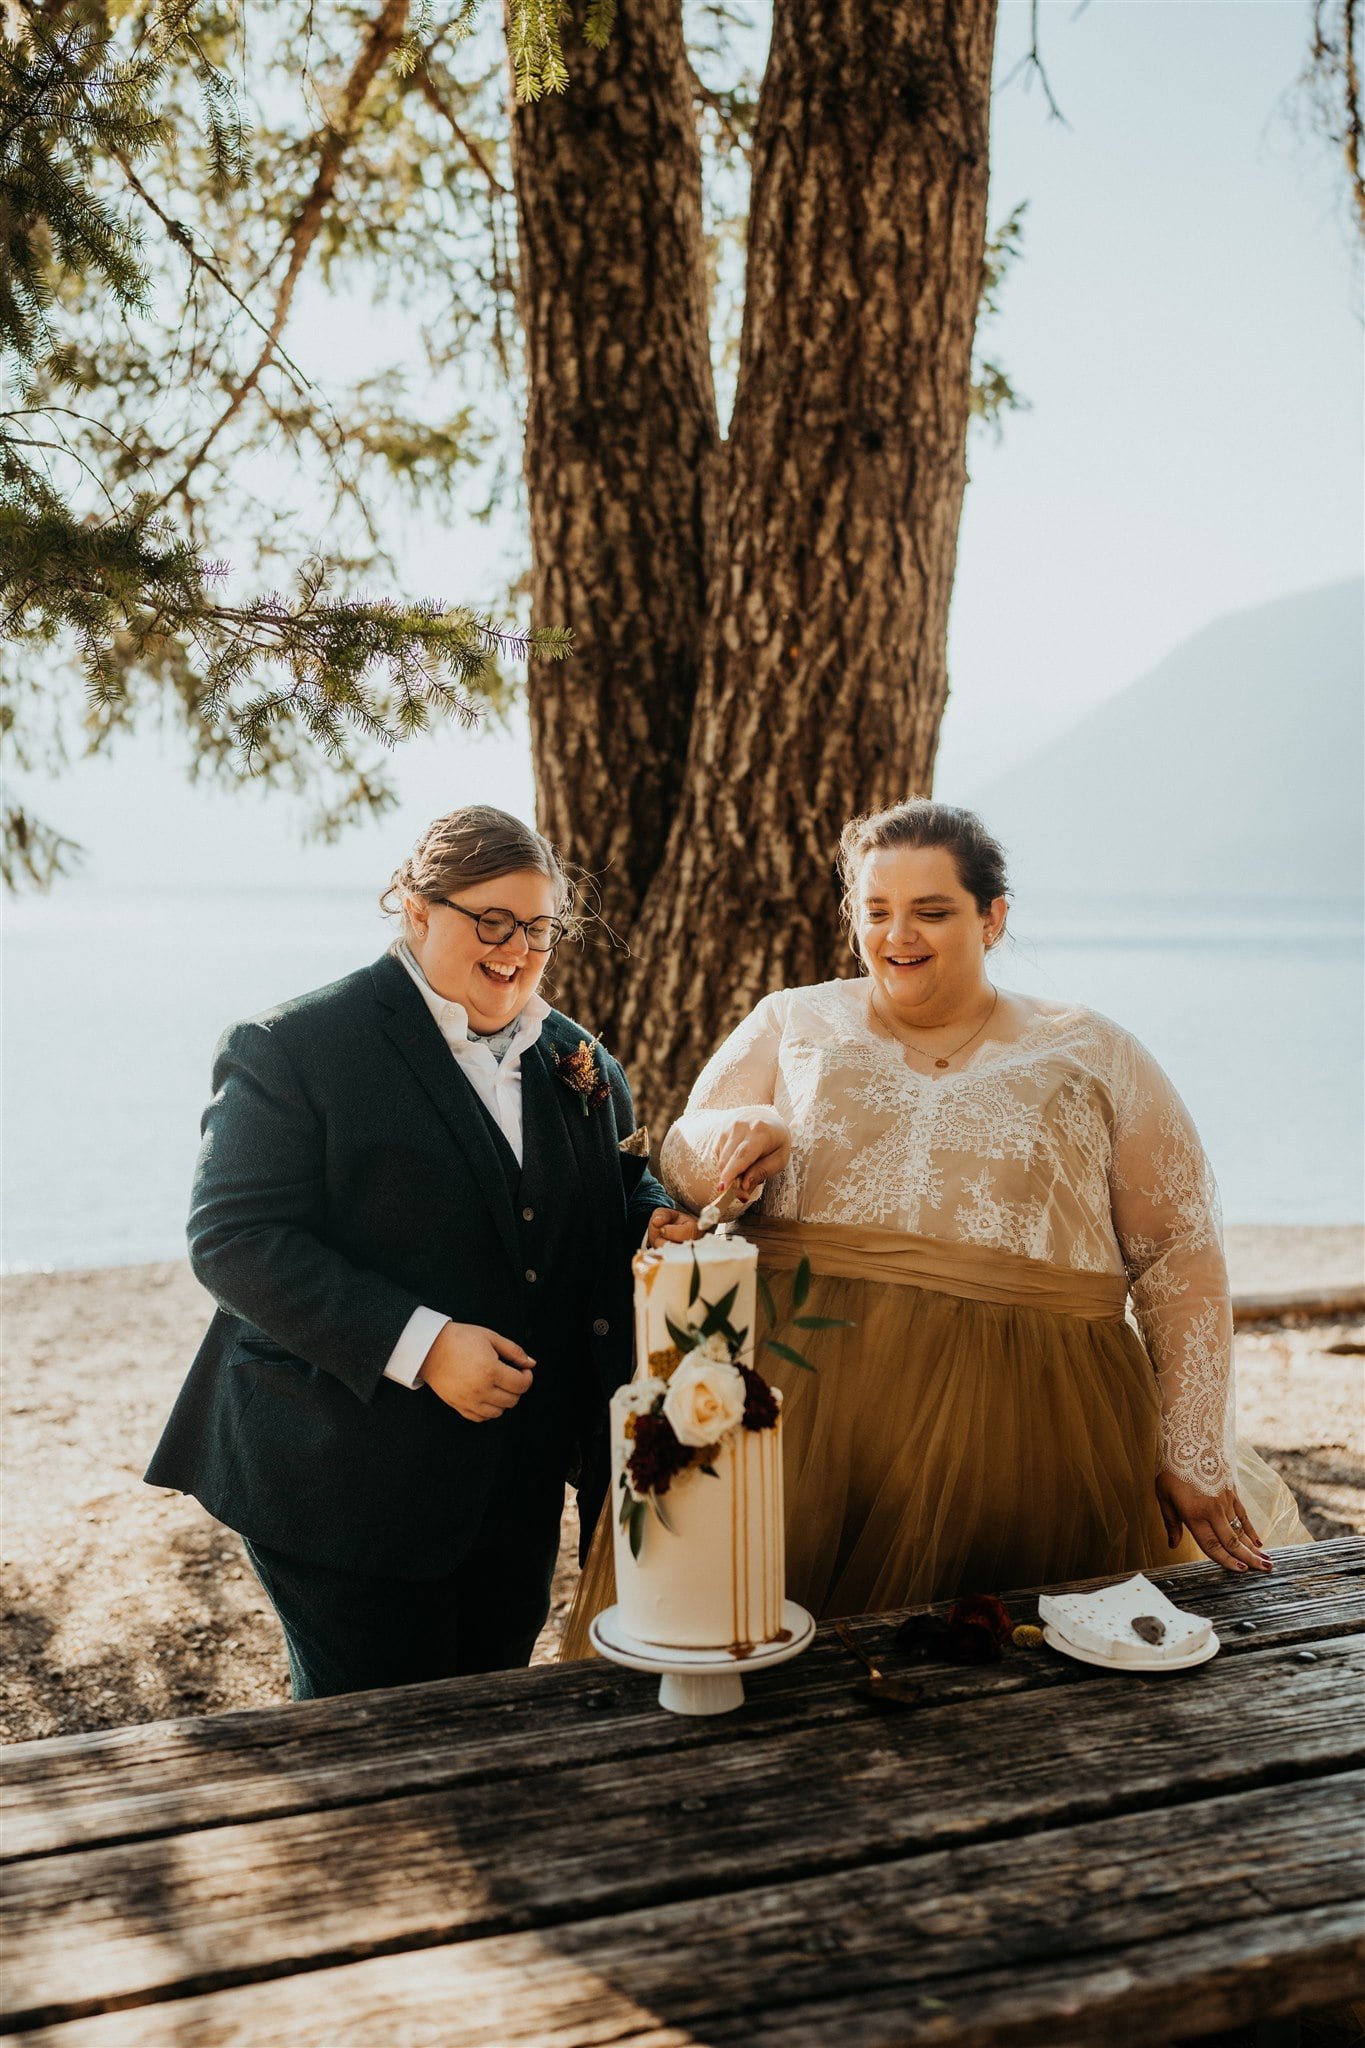 Brides cut into white two tier wedding cake at Lake Crescent elopement